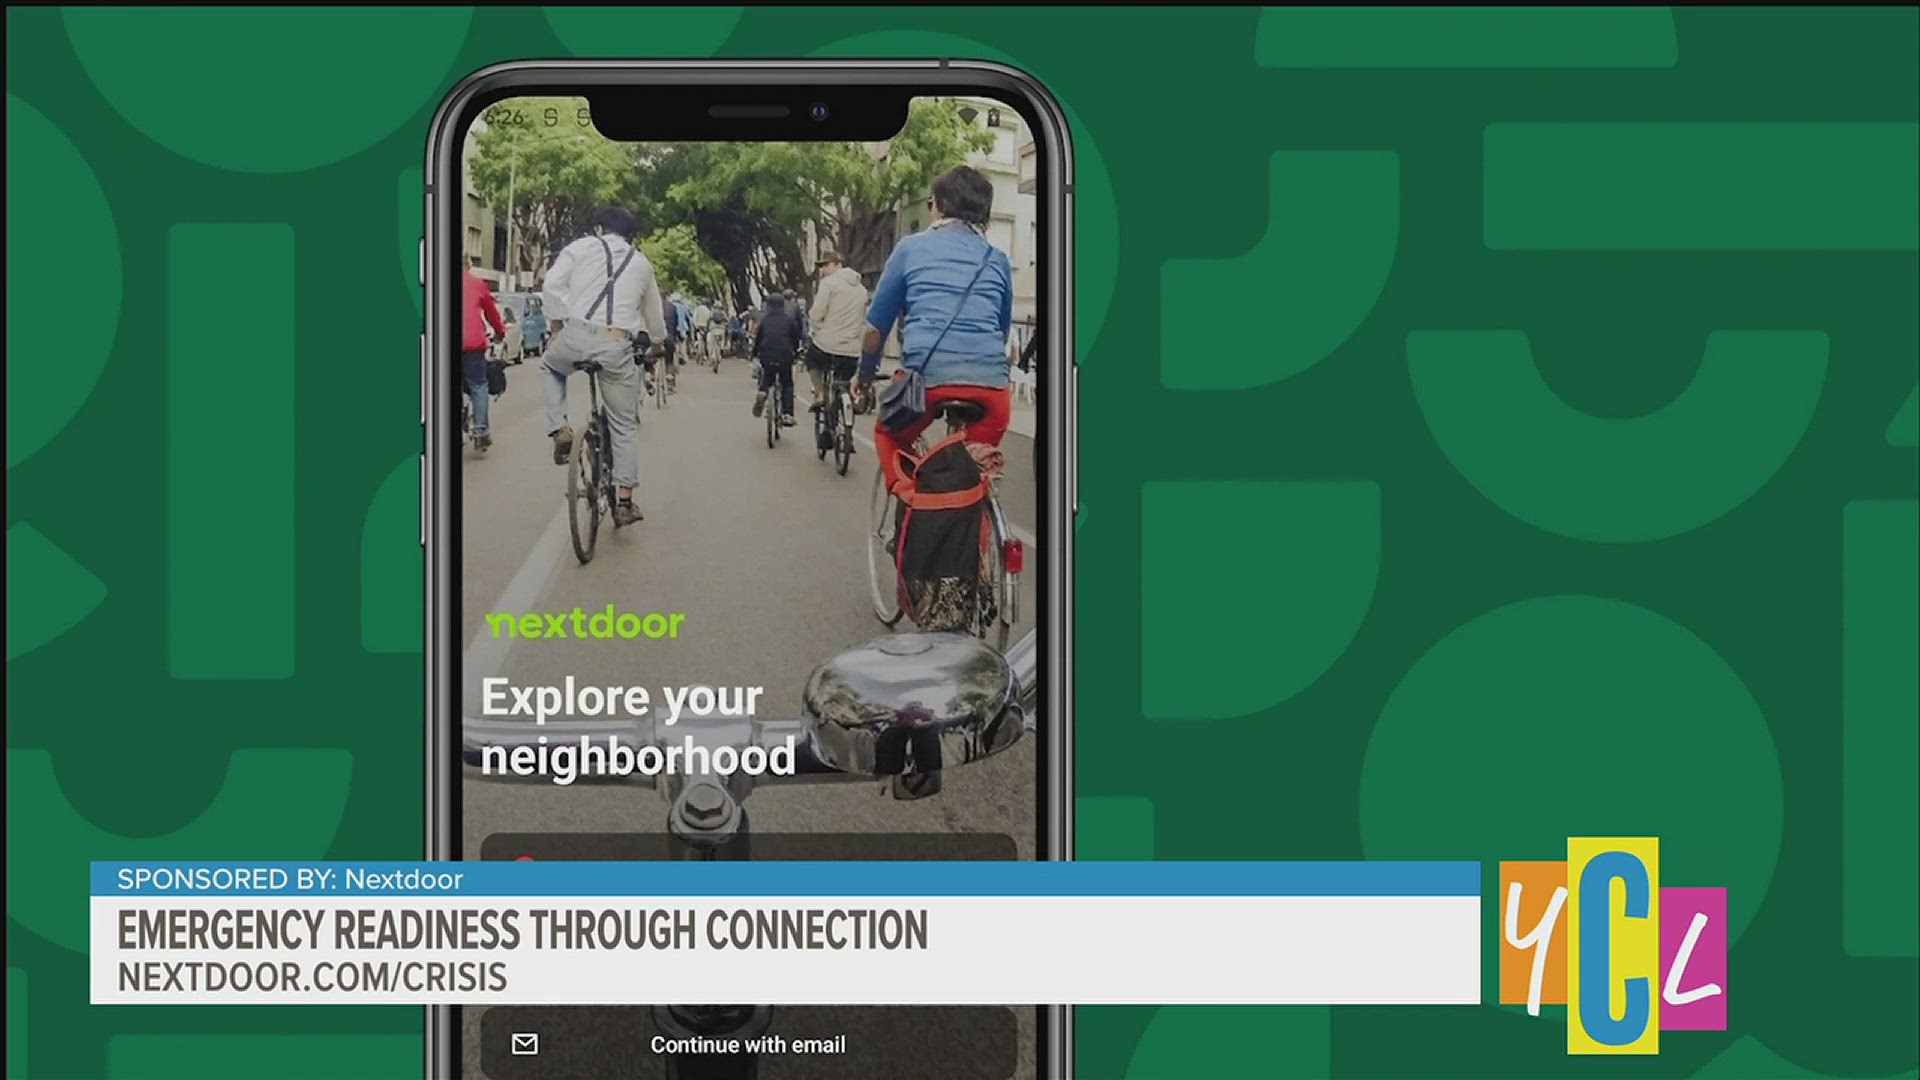 Discover a way to connect with neighbors and prepare for emergencies that may hit your community. This segment is paid for by Nextdoor.